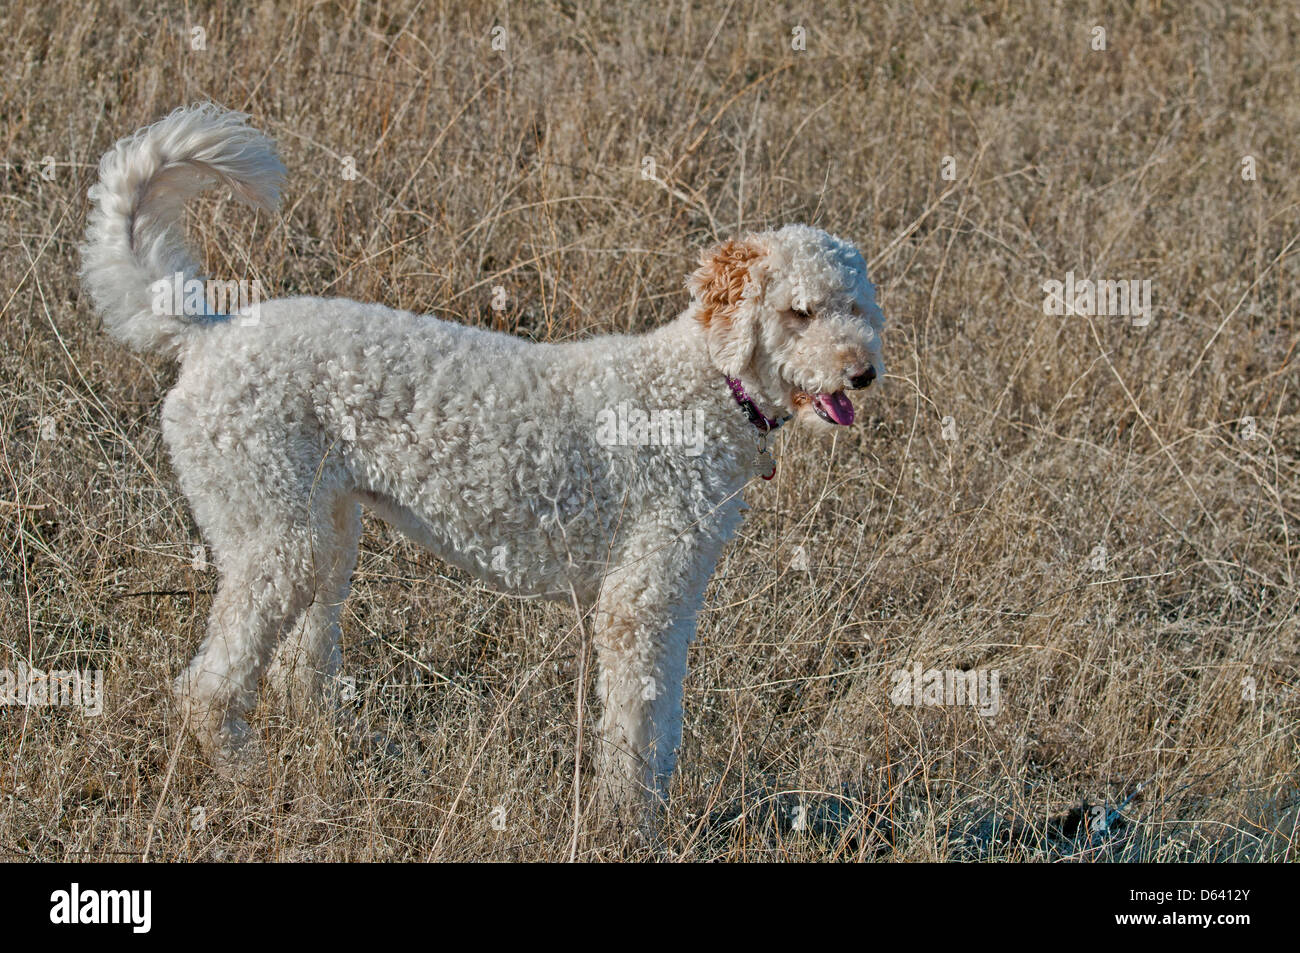 Goldendoodle (cross between a golden retriever and a standard poodle) Stock Photo